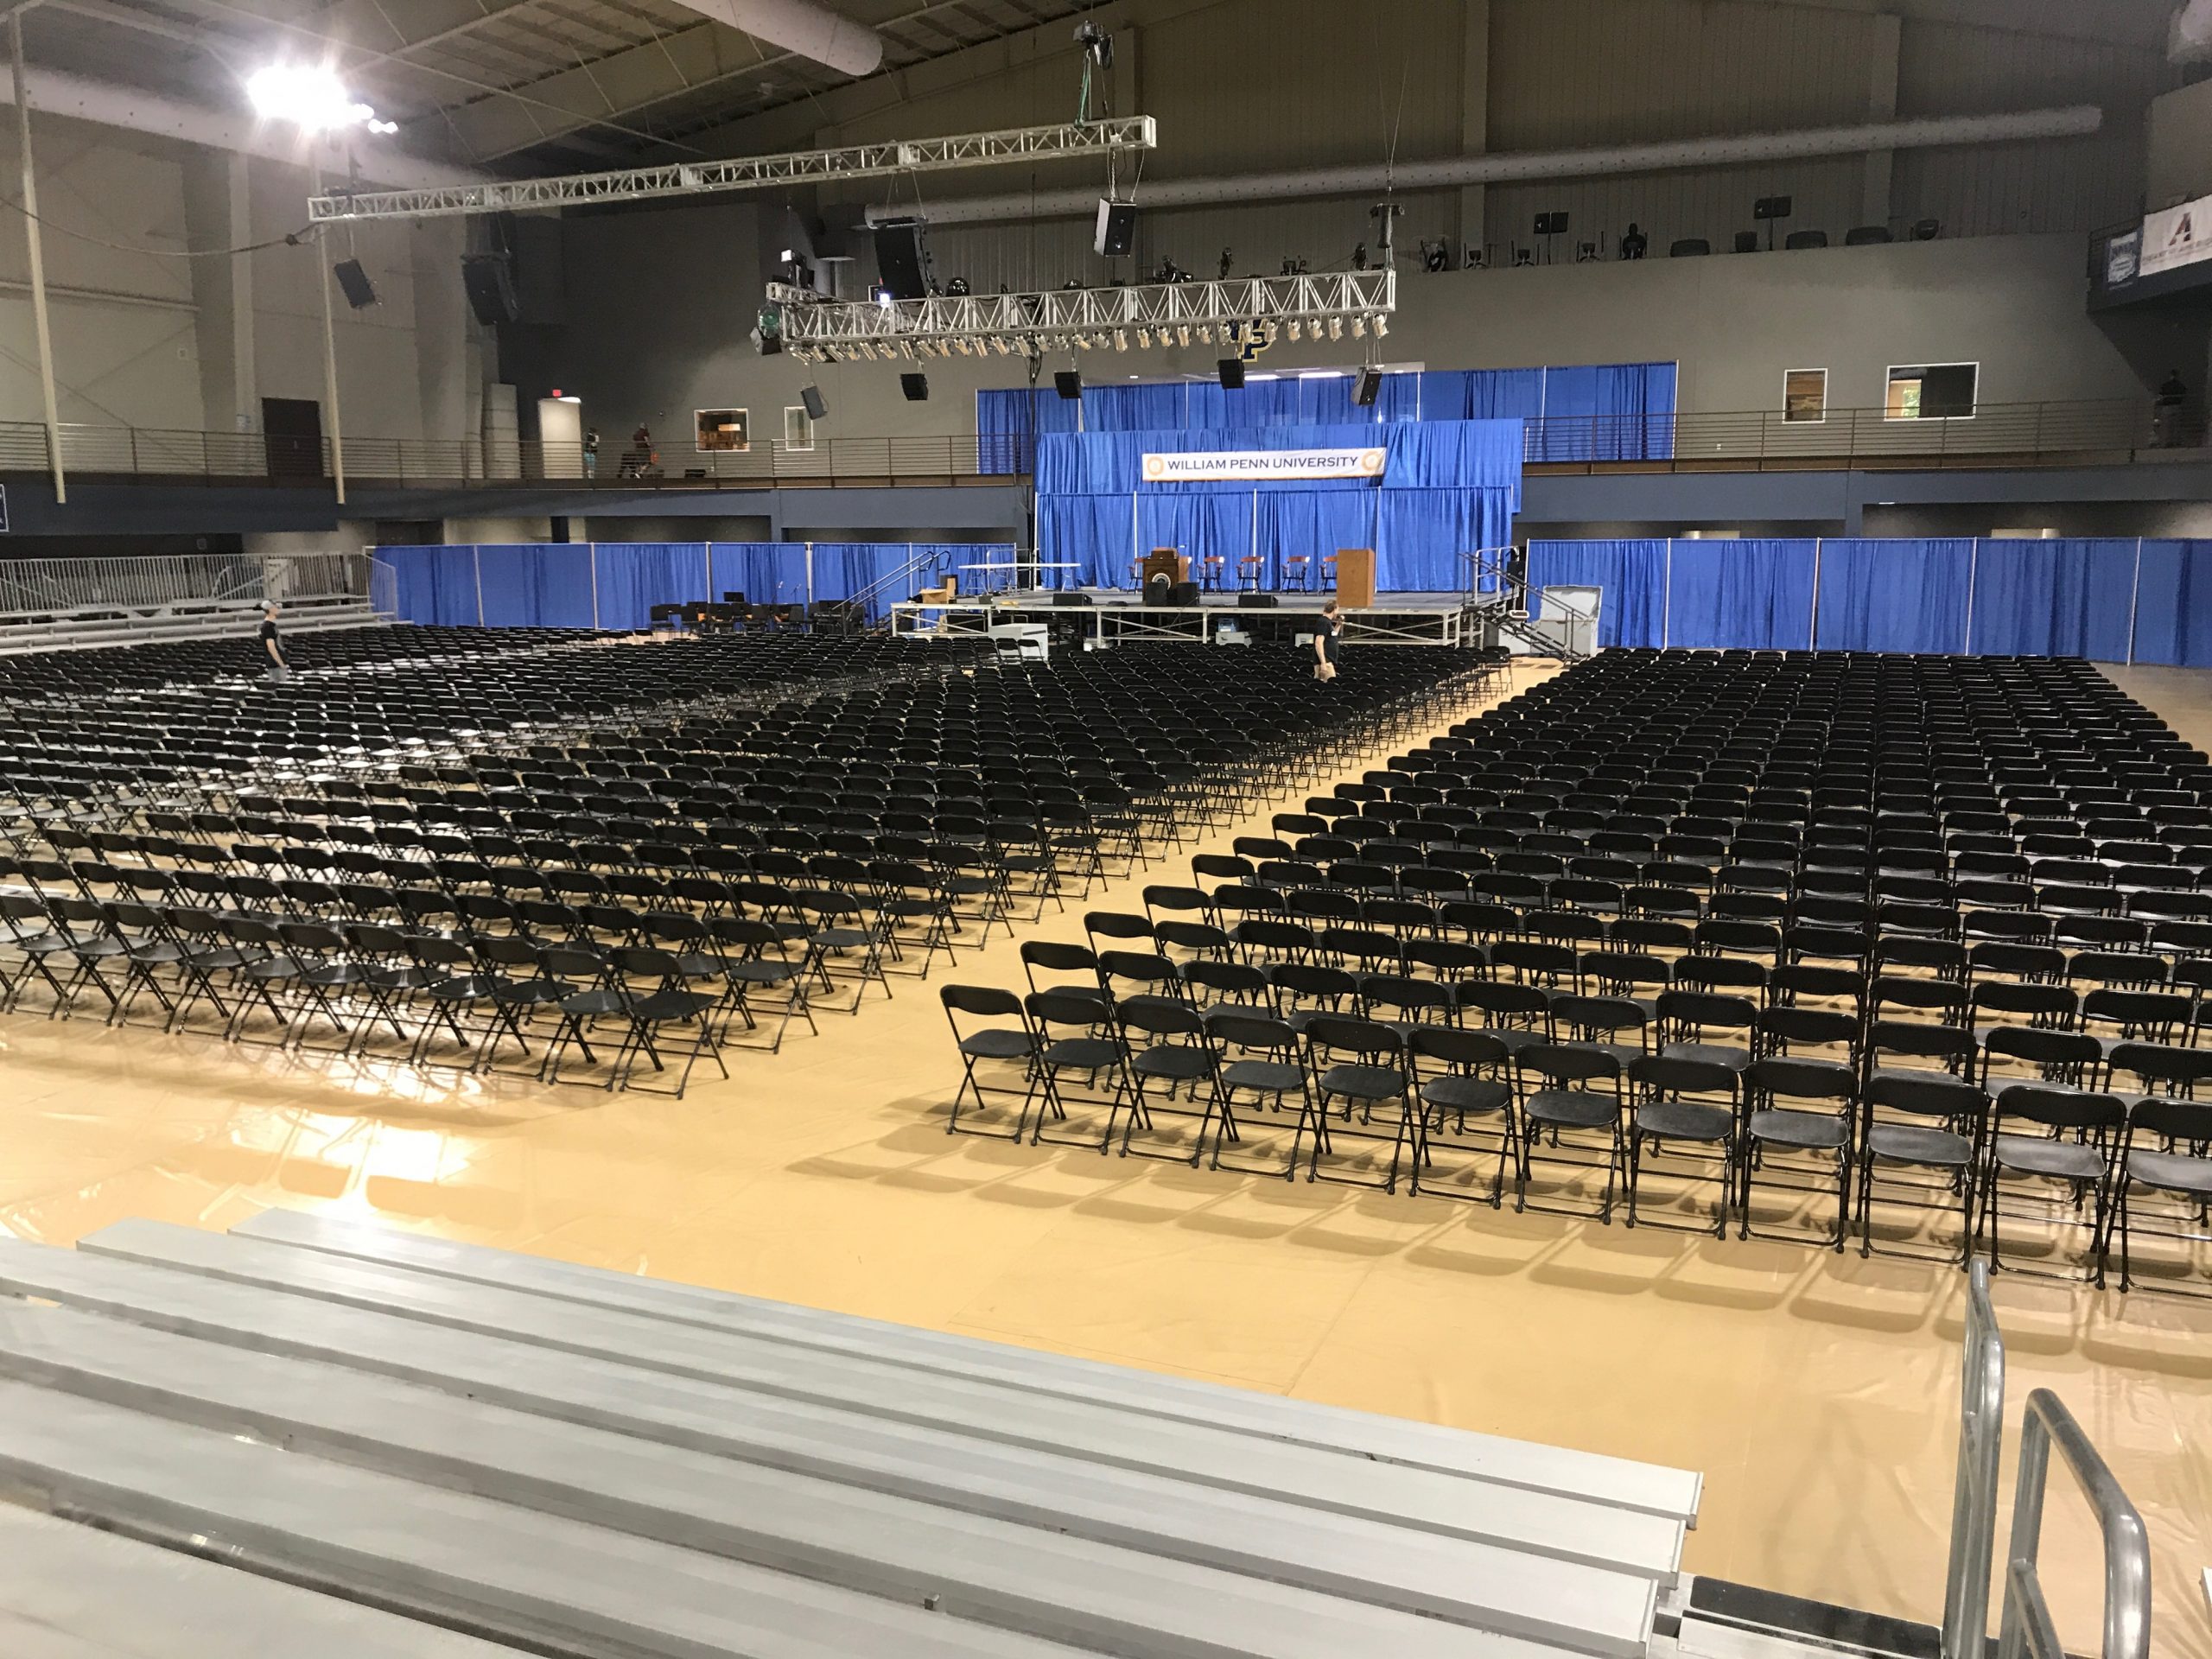 Stage, Chairs, Bleachers and more setup for 2017 Graduation at William Penn University in Oskaloosa, IA